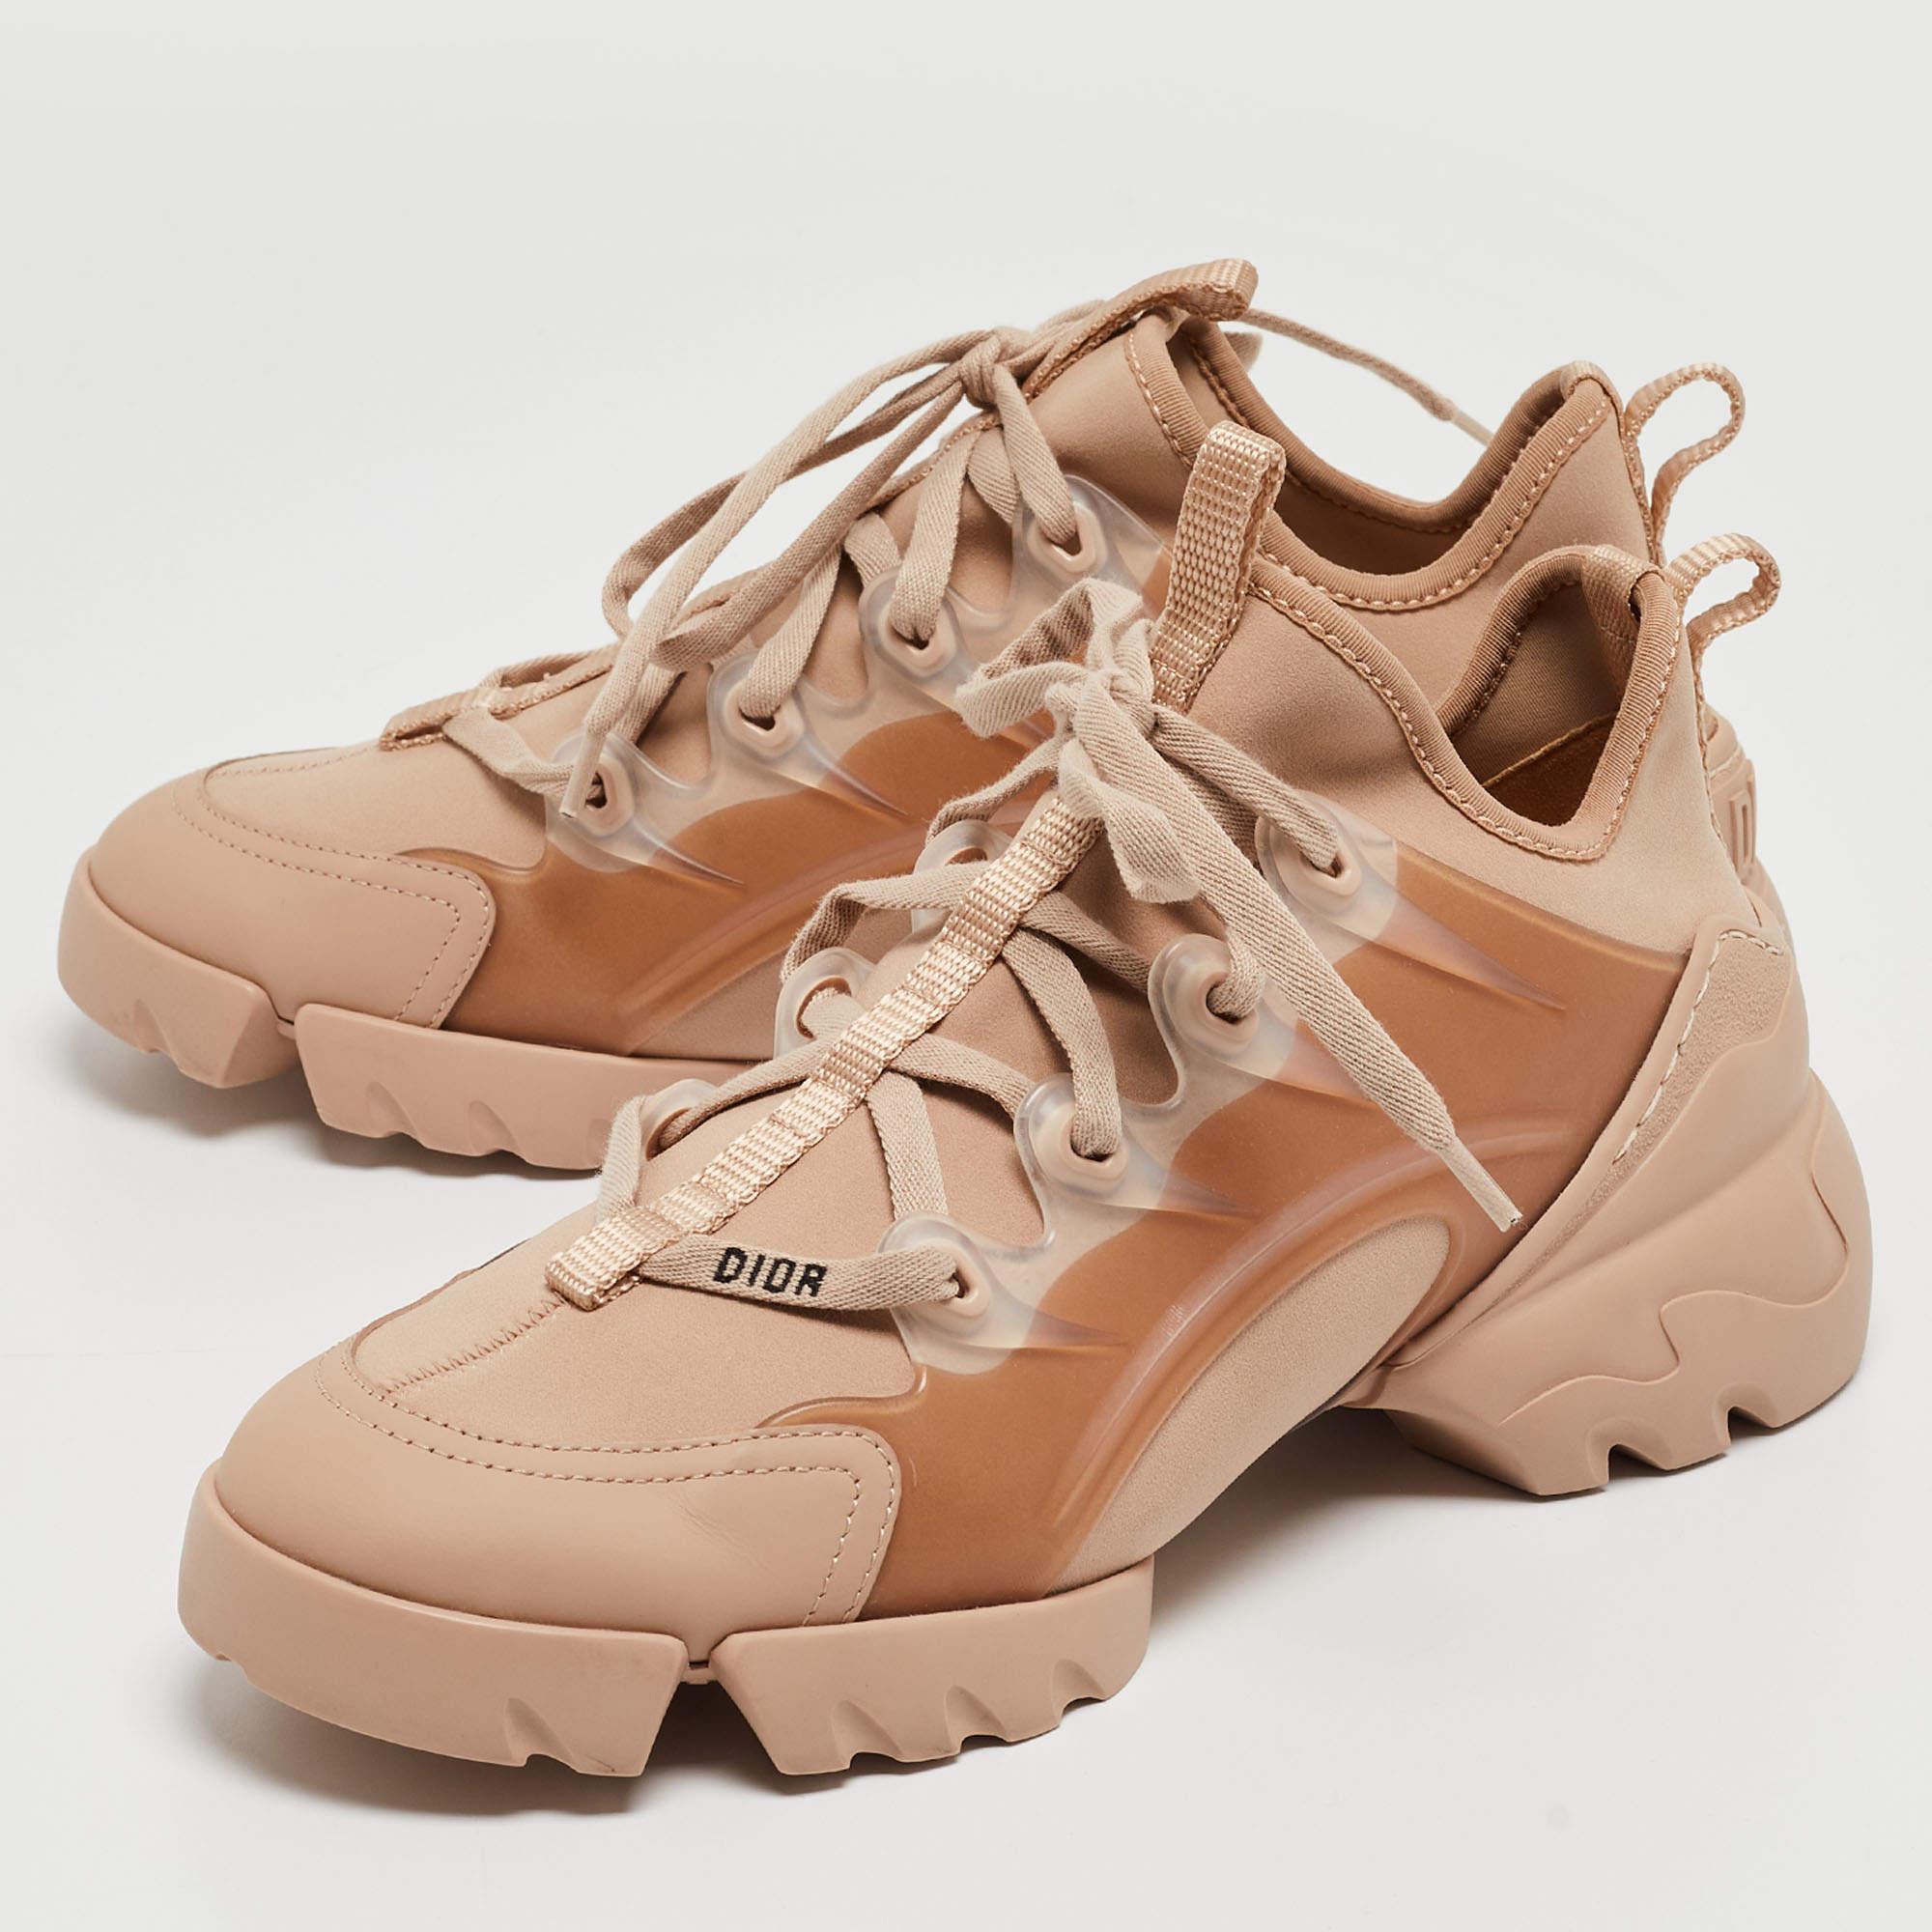 Dior Beige Neoprene and Leather D-Connect Sneakers Size 38 4